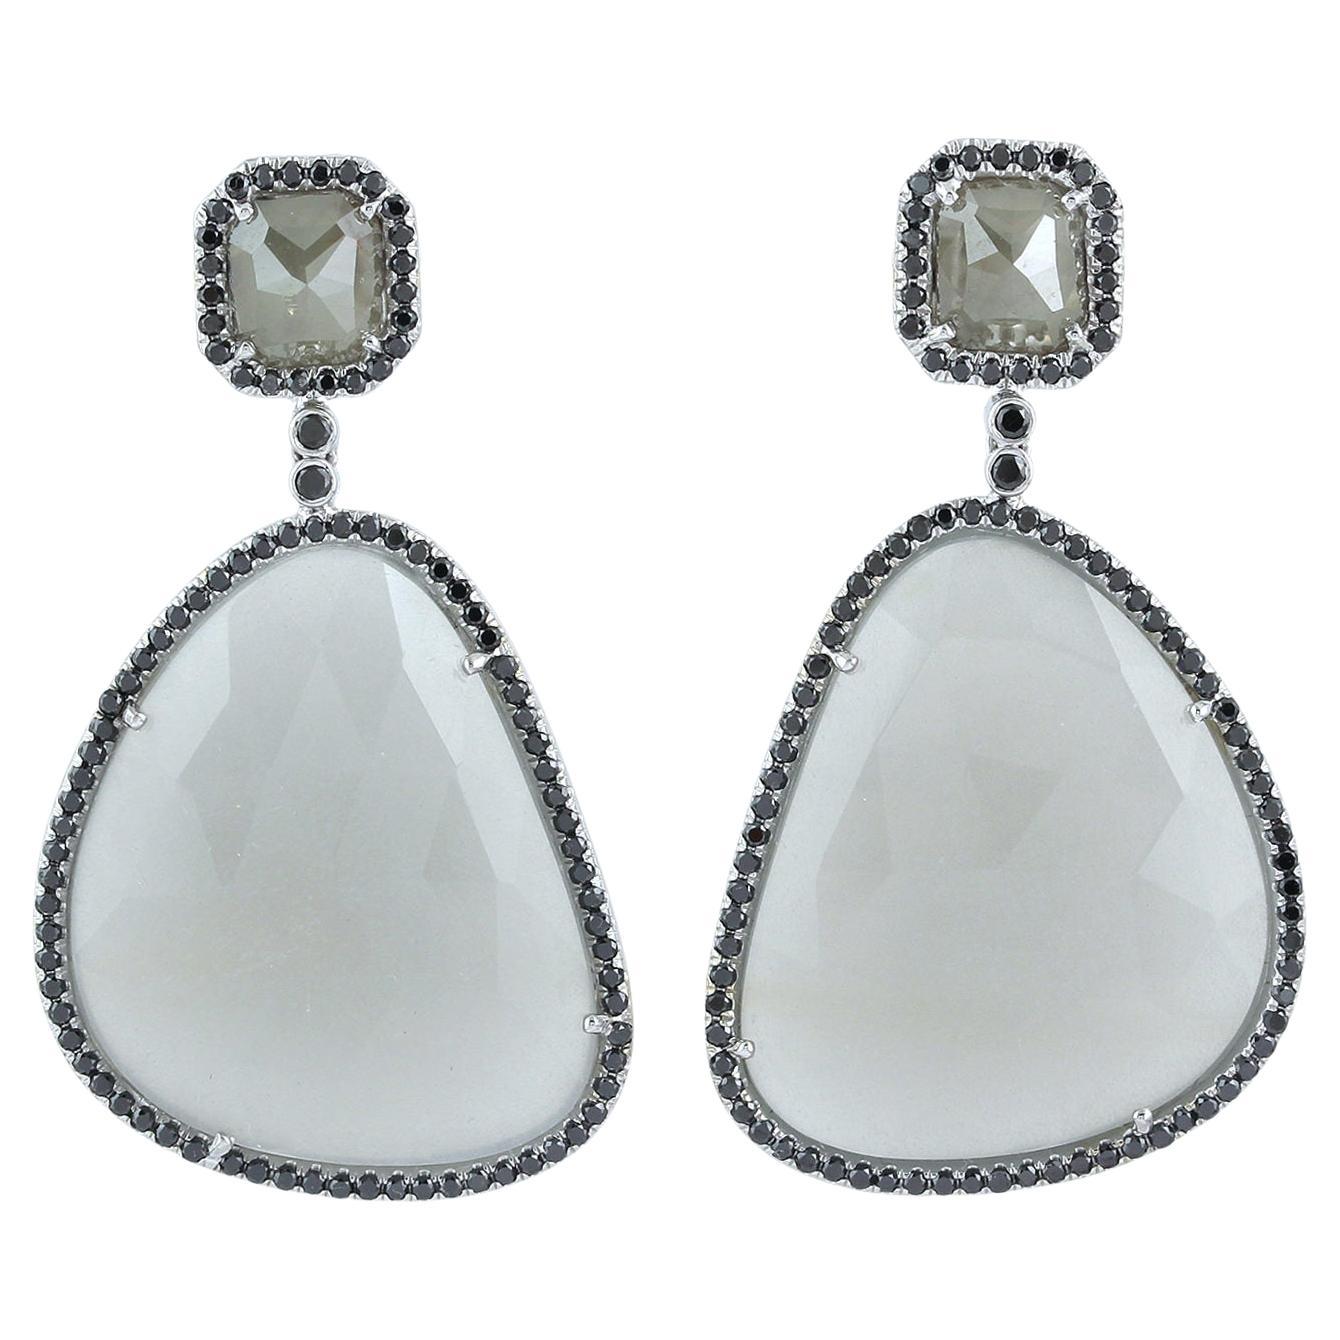 Pear Shaped Sliced Moonstone Dangle Earring With Diamonds Made 18k White Gold